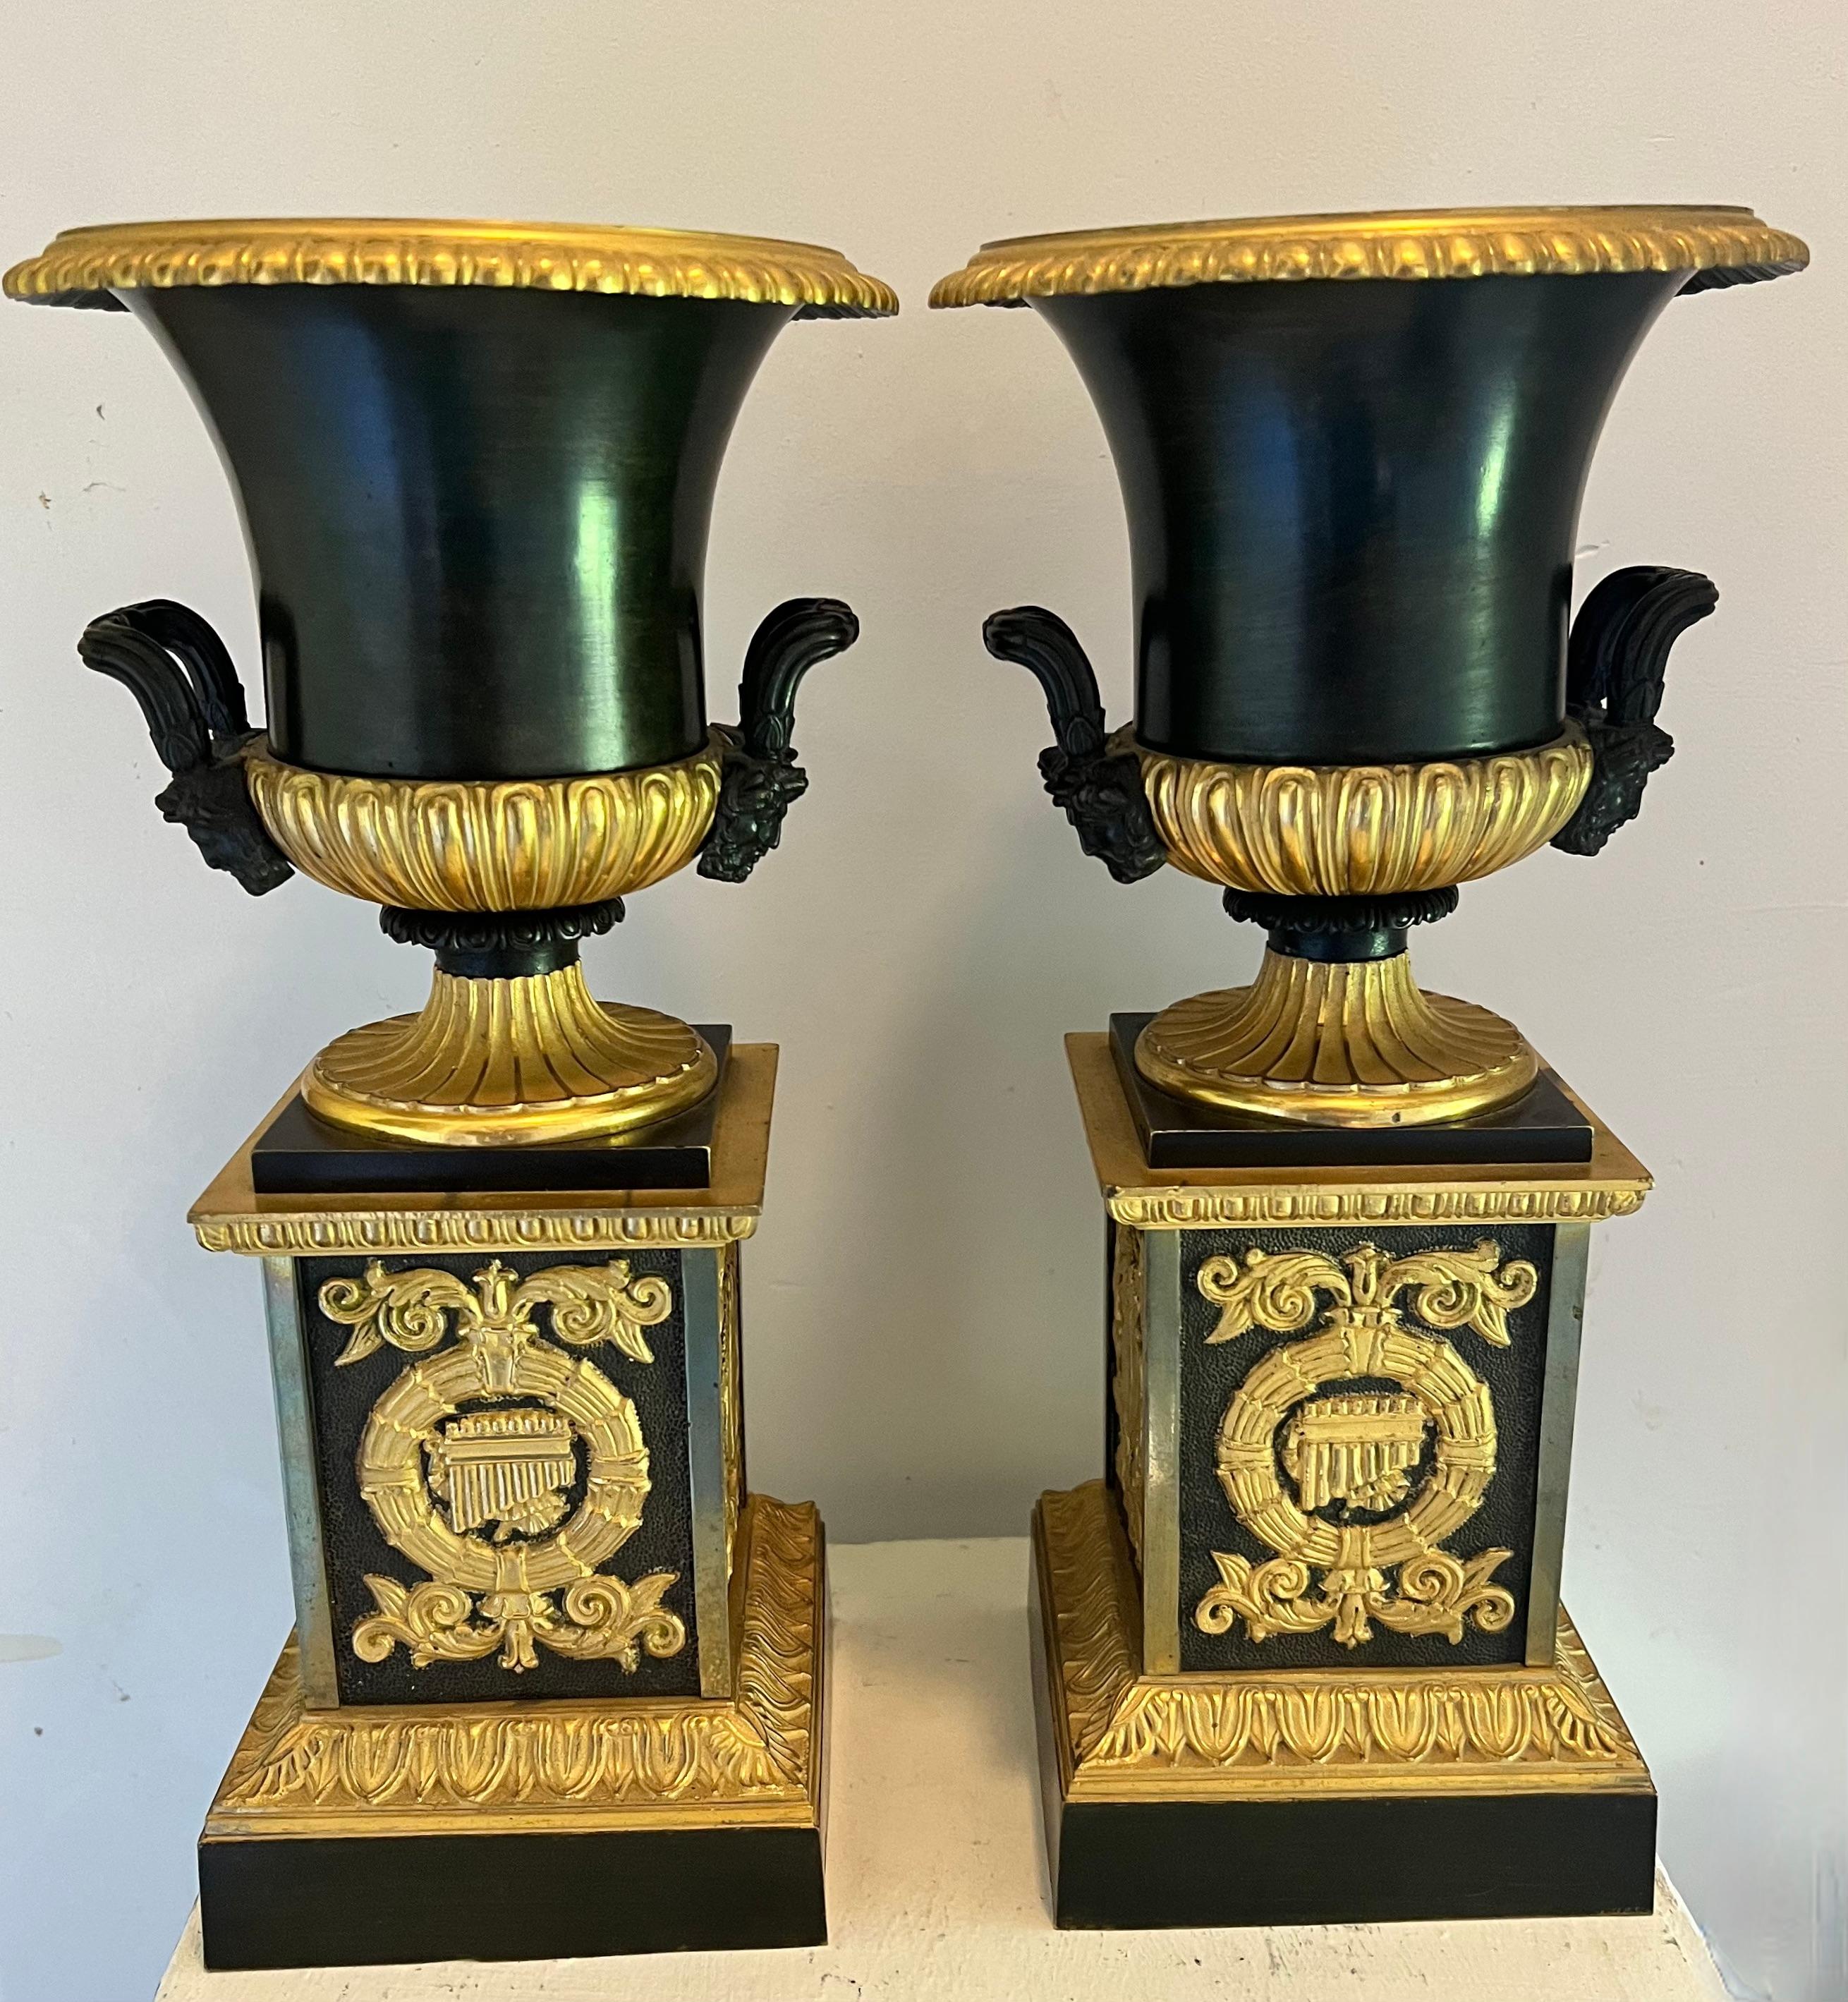 A beautiful pair of quality bronze Dore Urns on Pedestals.  The pair are in wonderful vintage condition.  one small bend to the lip or edge of one - not greatly noticeable or offense... the two are a great pair - we prefer them stand alone and not